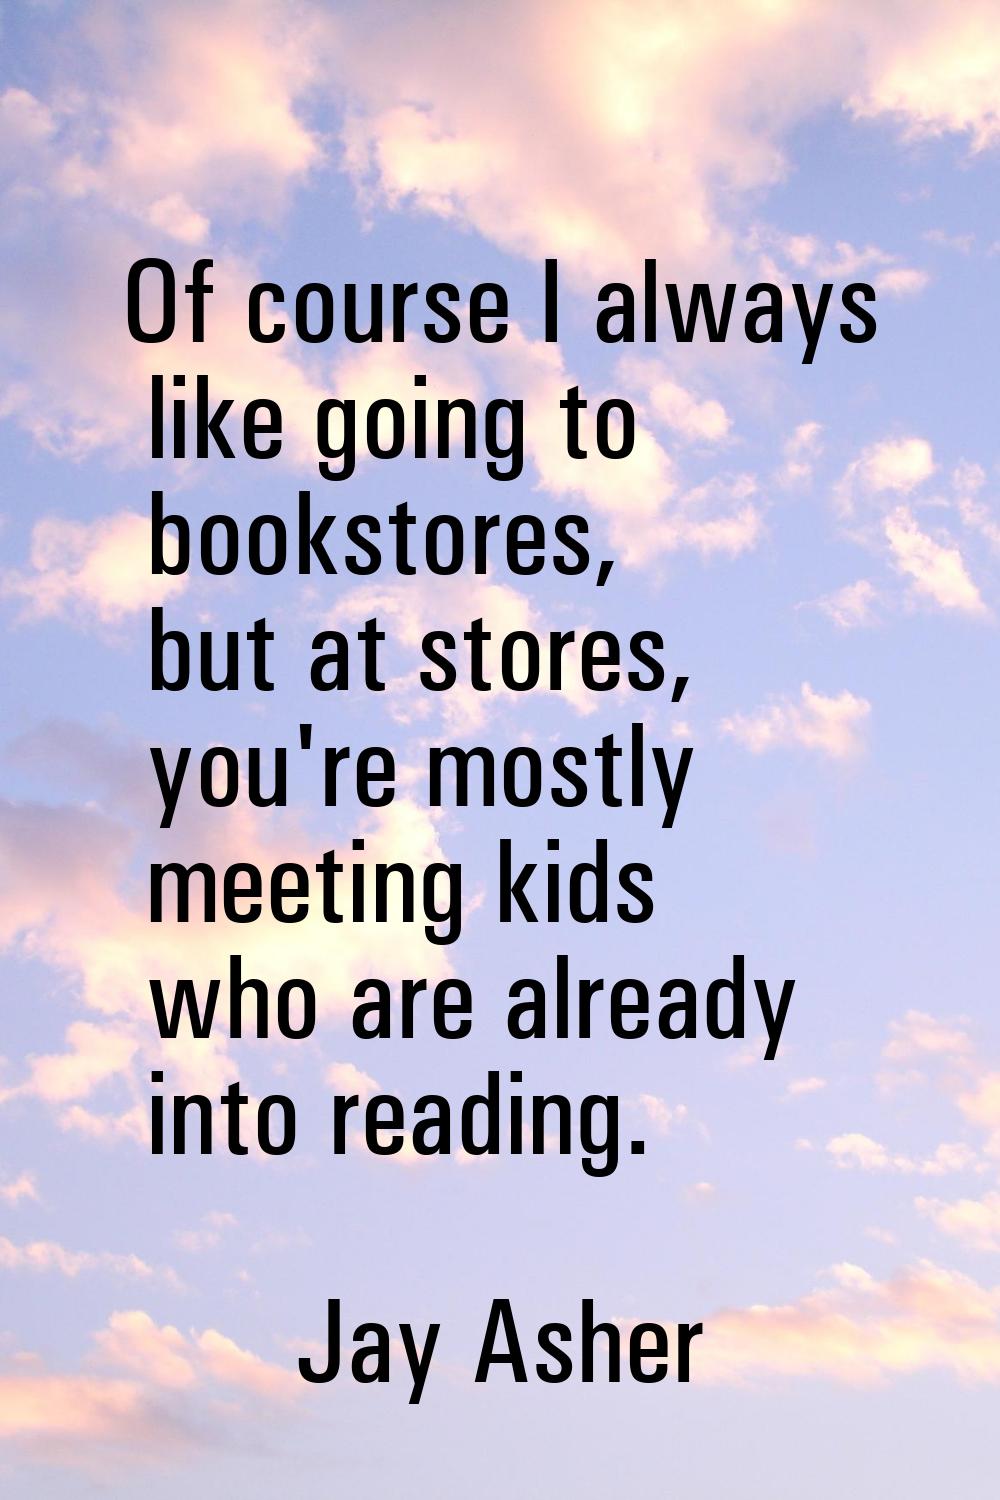 Of course I always like going to bookstores, but at stores, you're mostly meeting kids who are alre